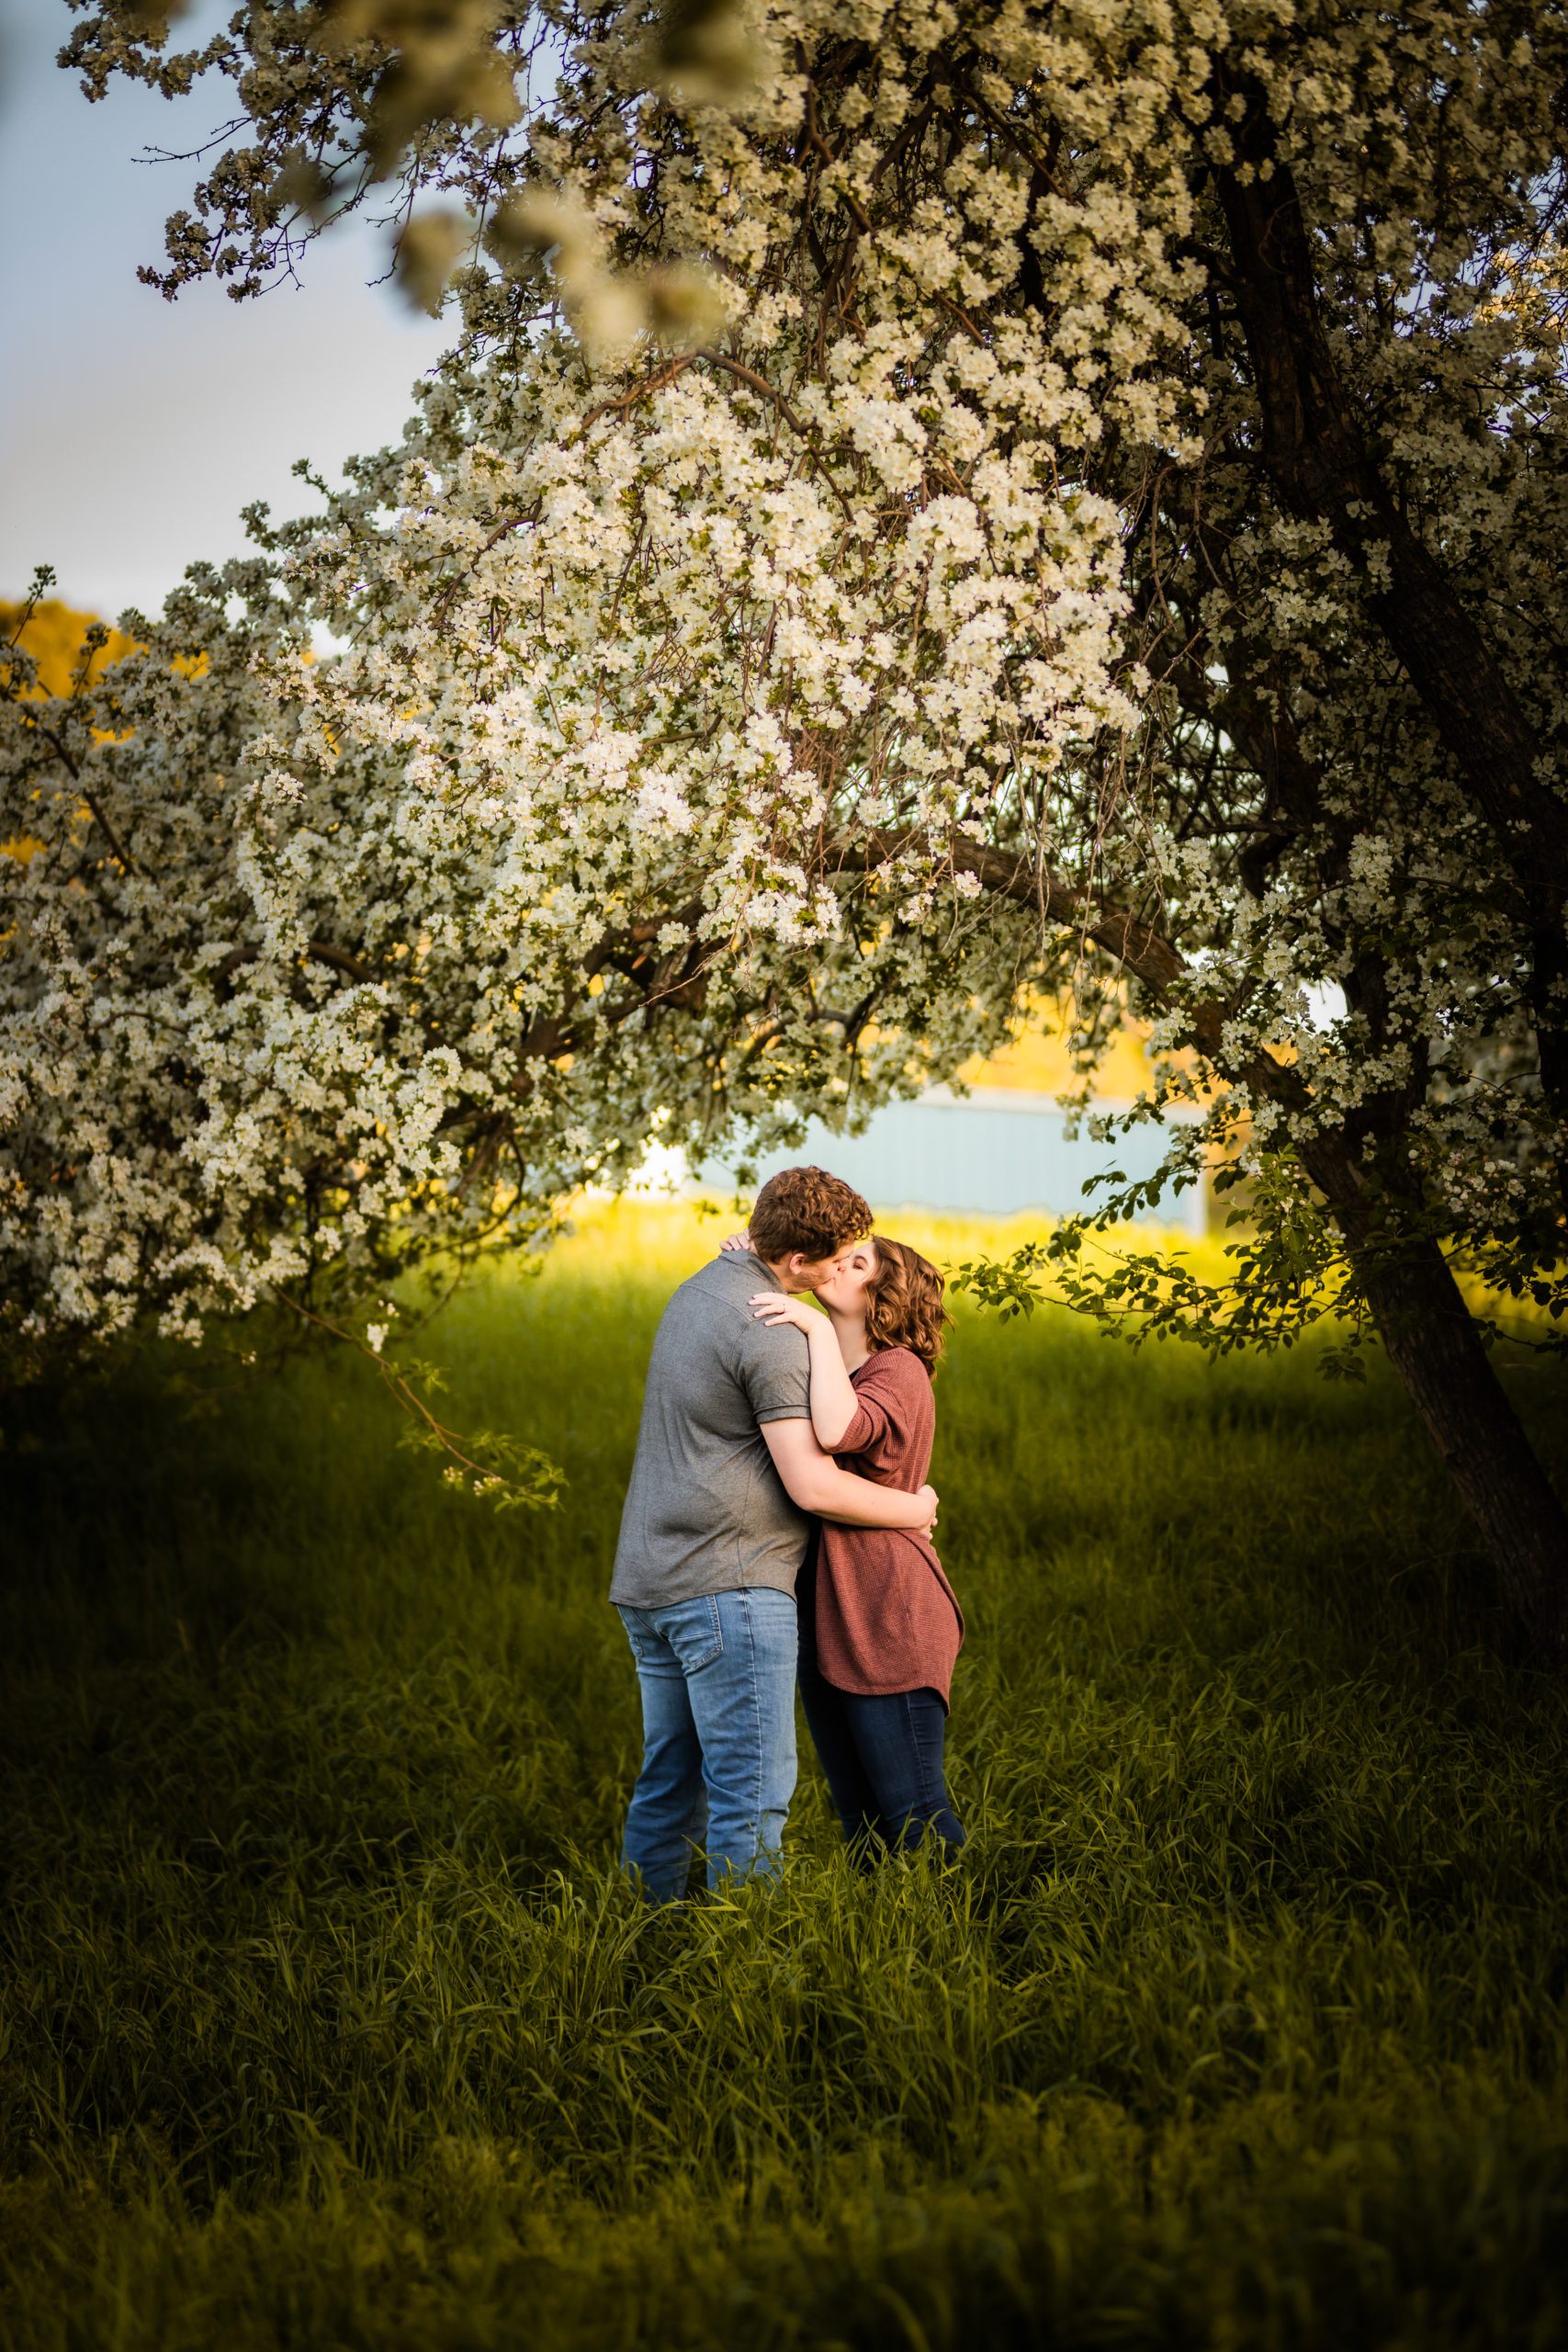 couple hugging in apple blossoms